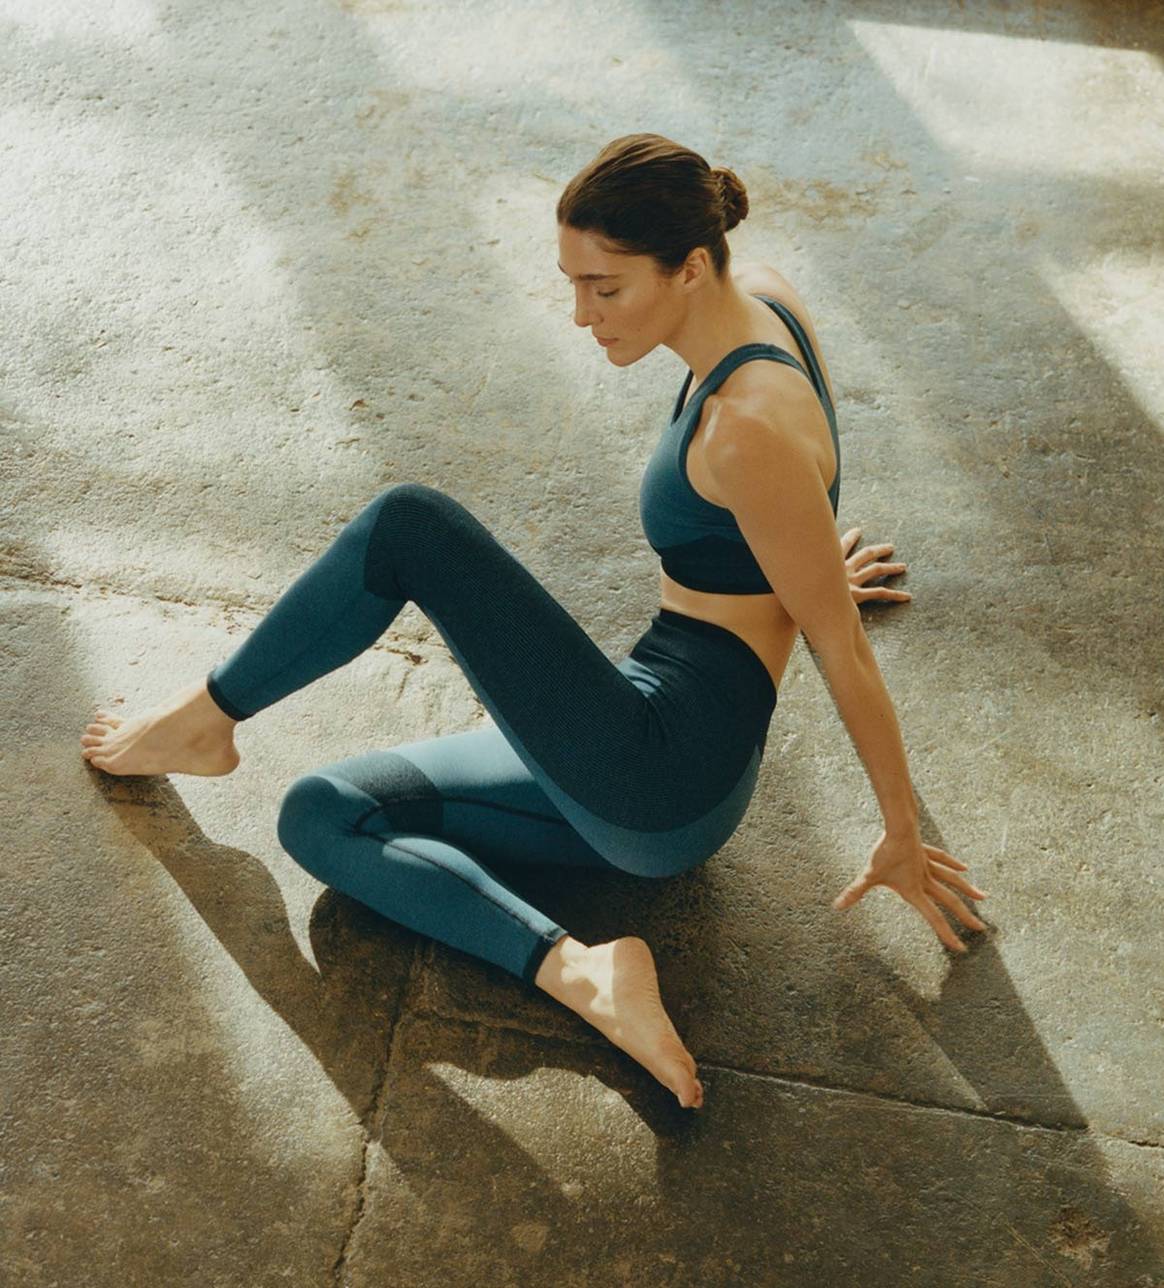 Cos launches its first women's activewear collection